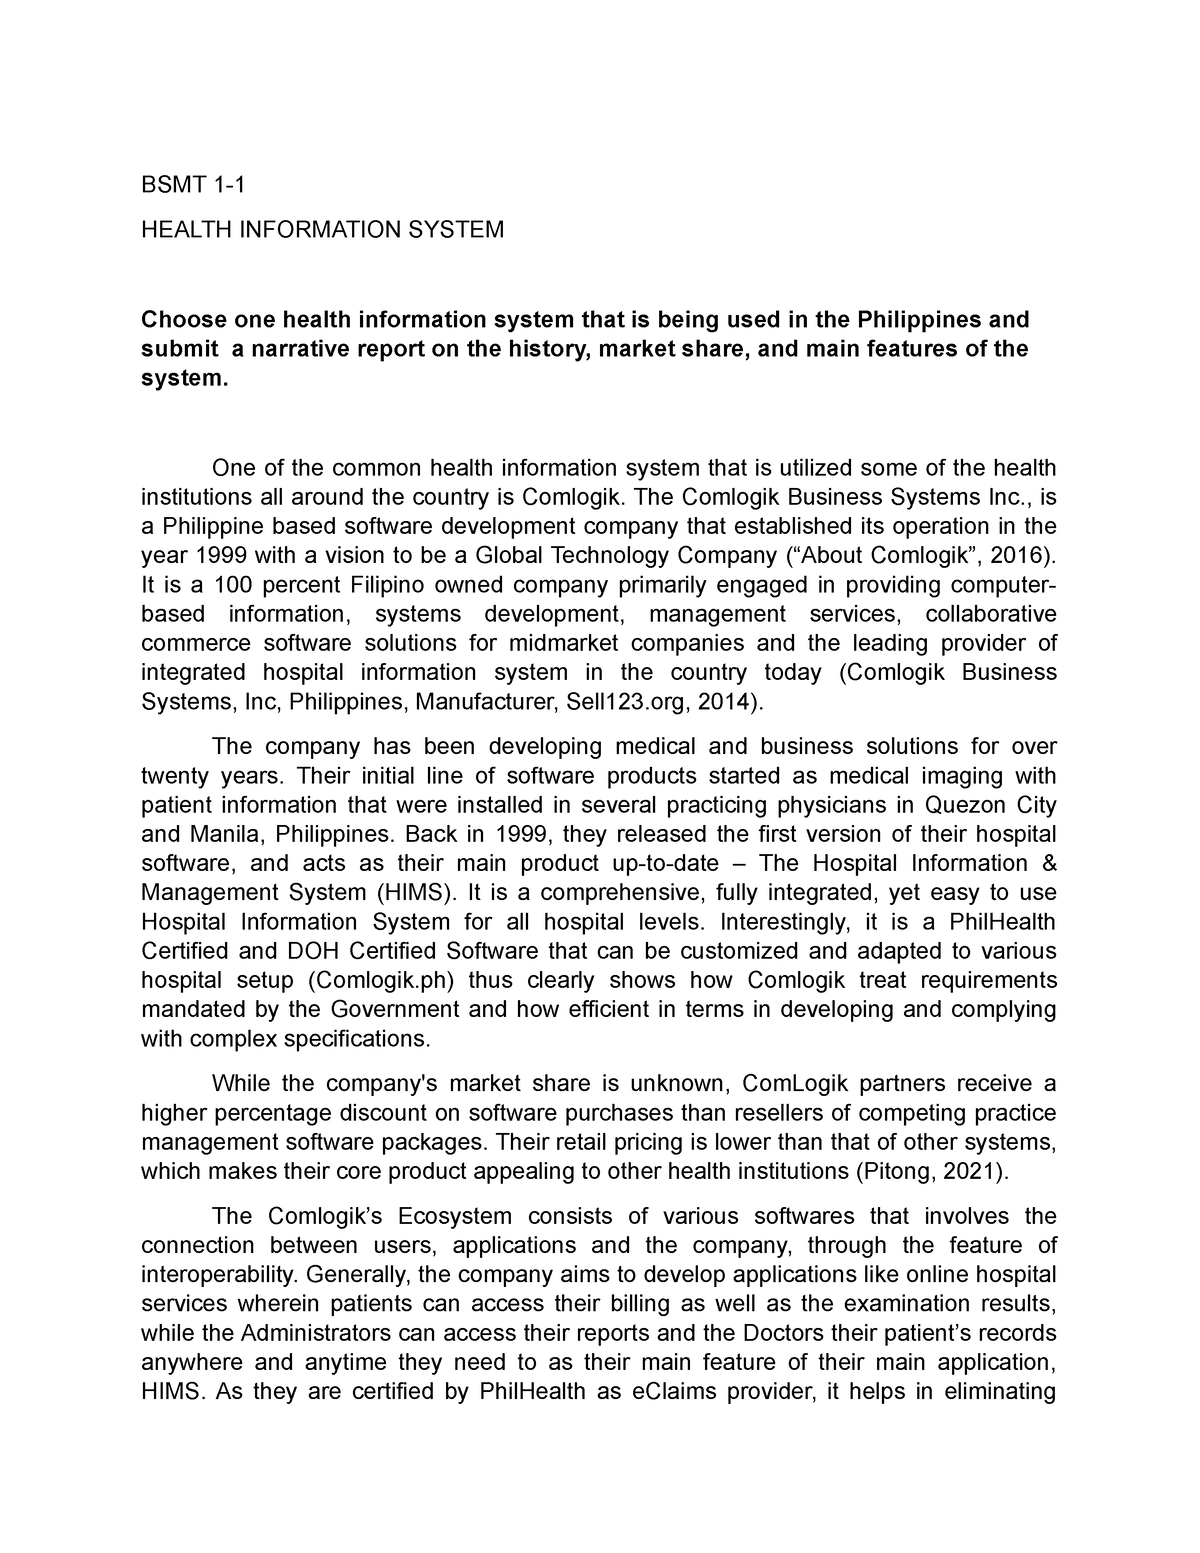 essay about medical technology in the philippines